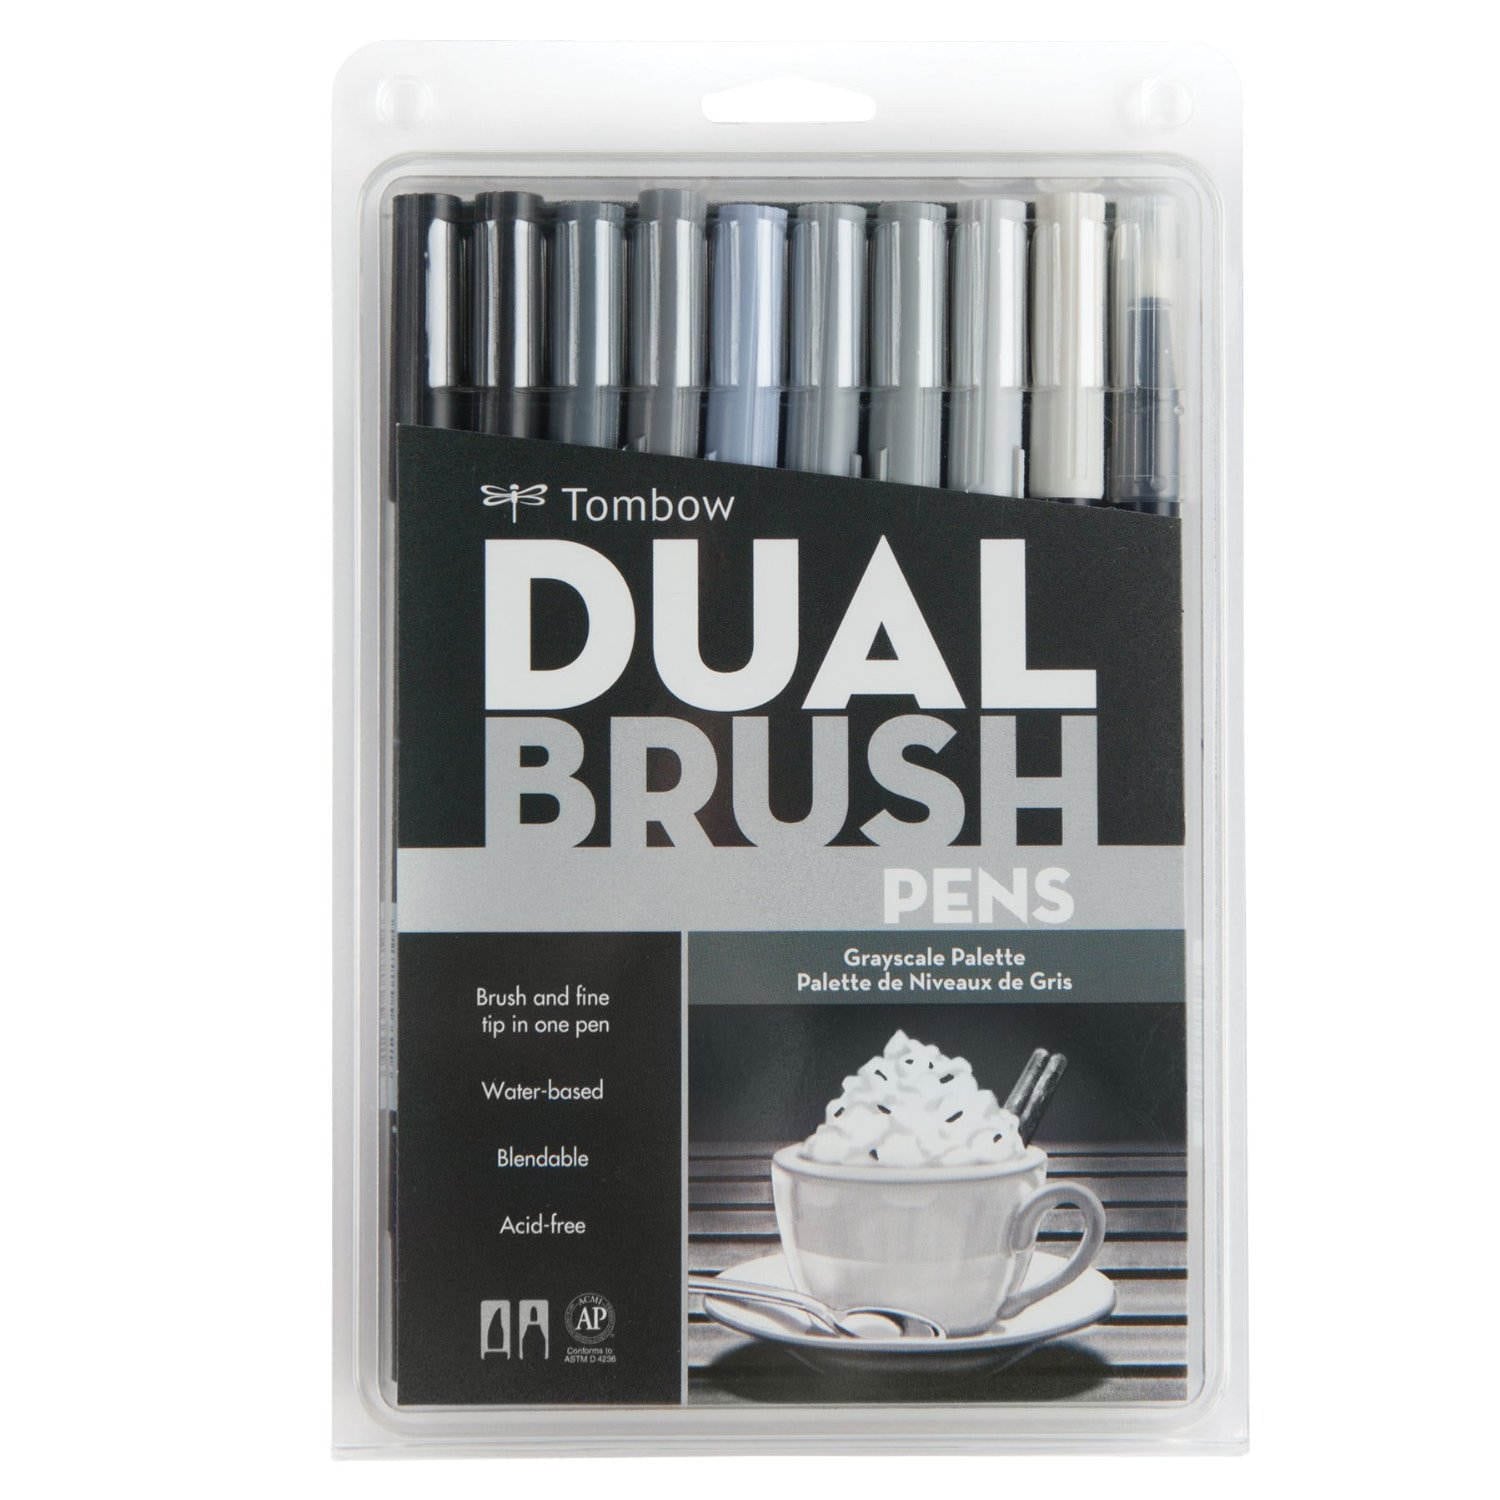 Grayscale Coloring: Colored Pencils Over Water-Based Markers